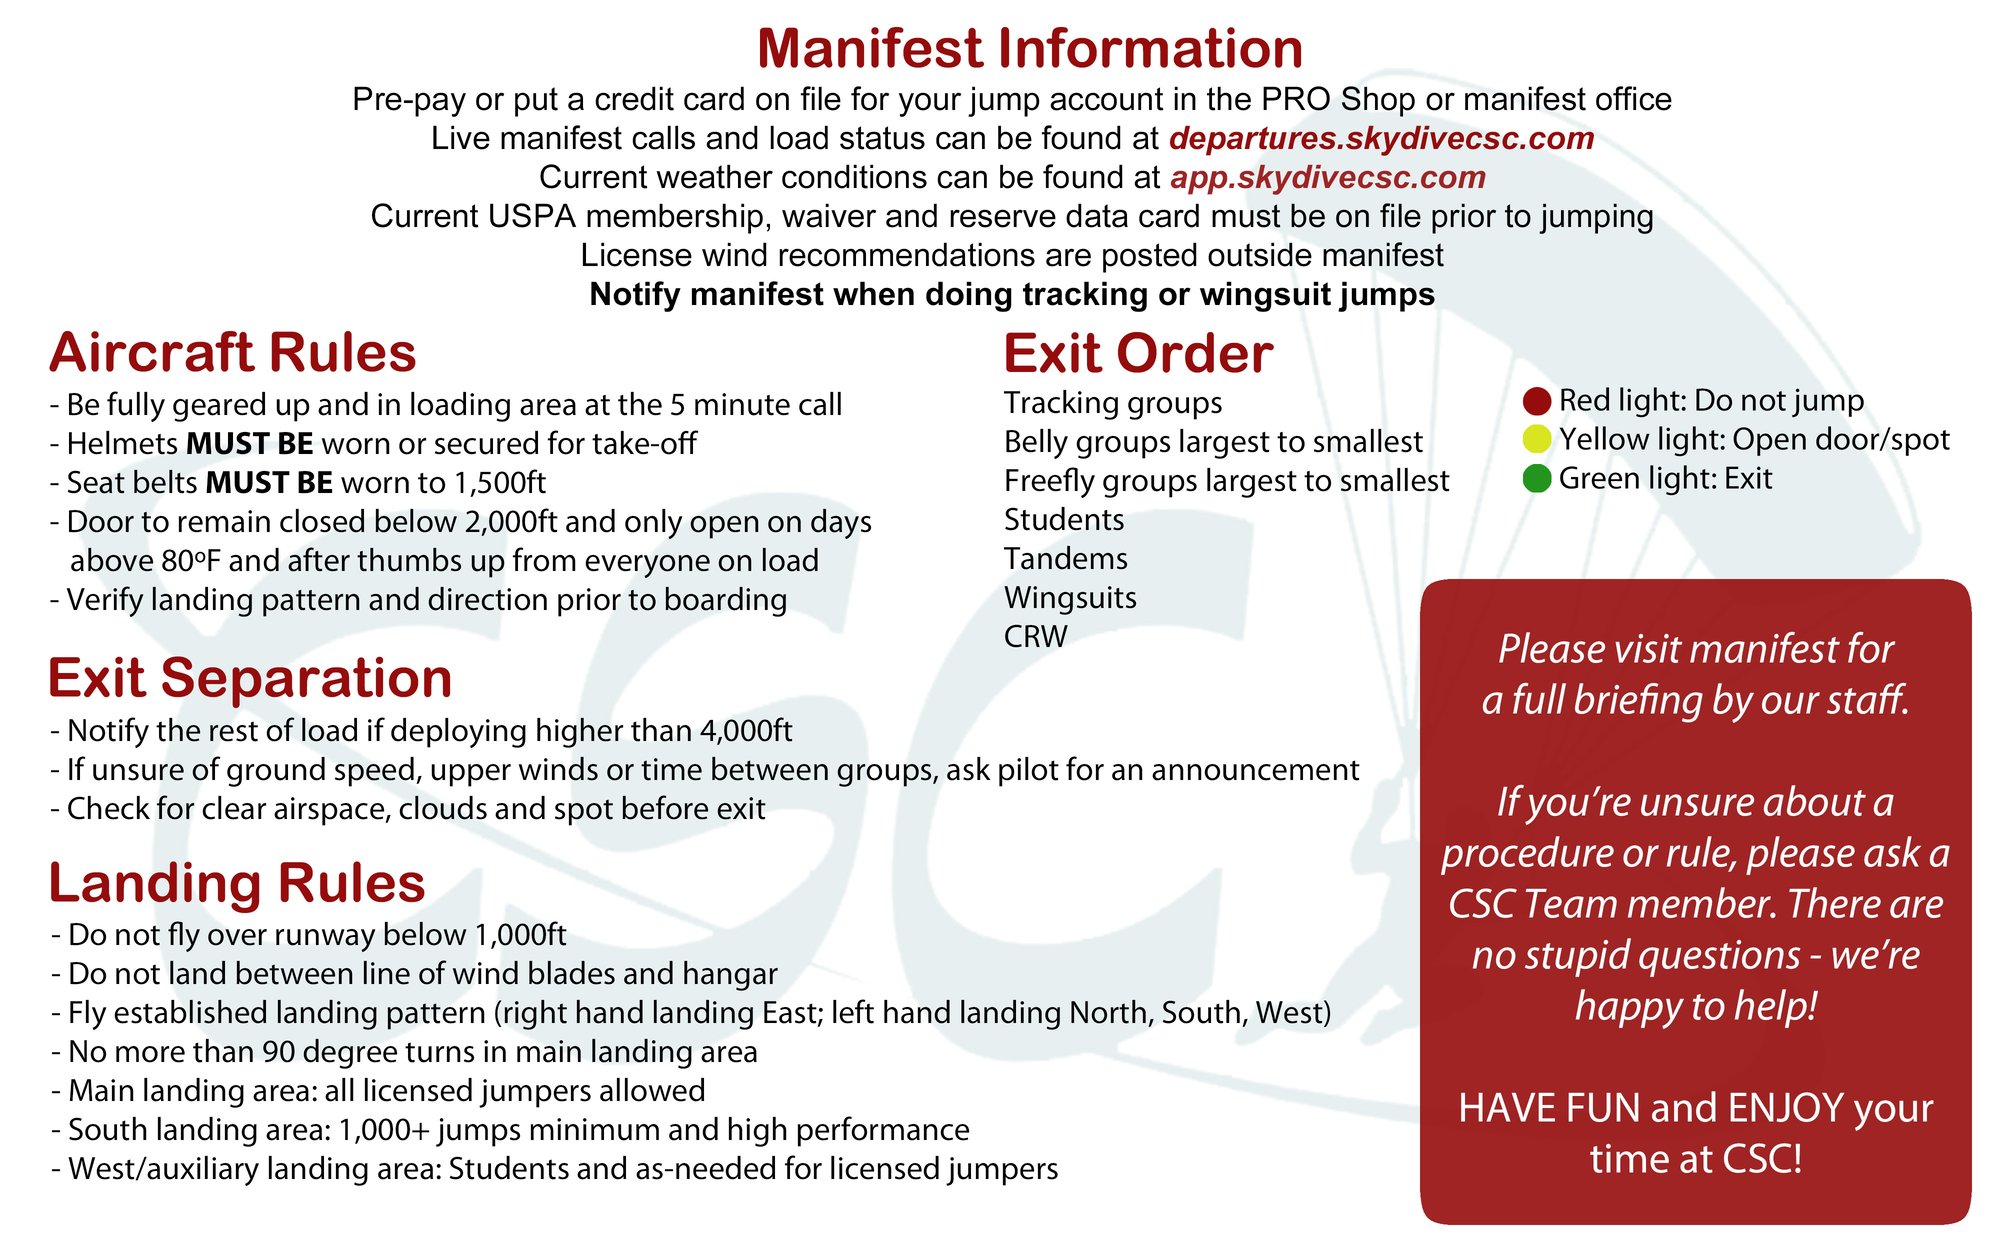 CSC Safety Card